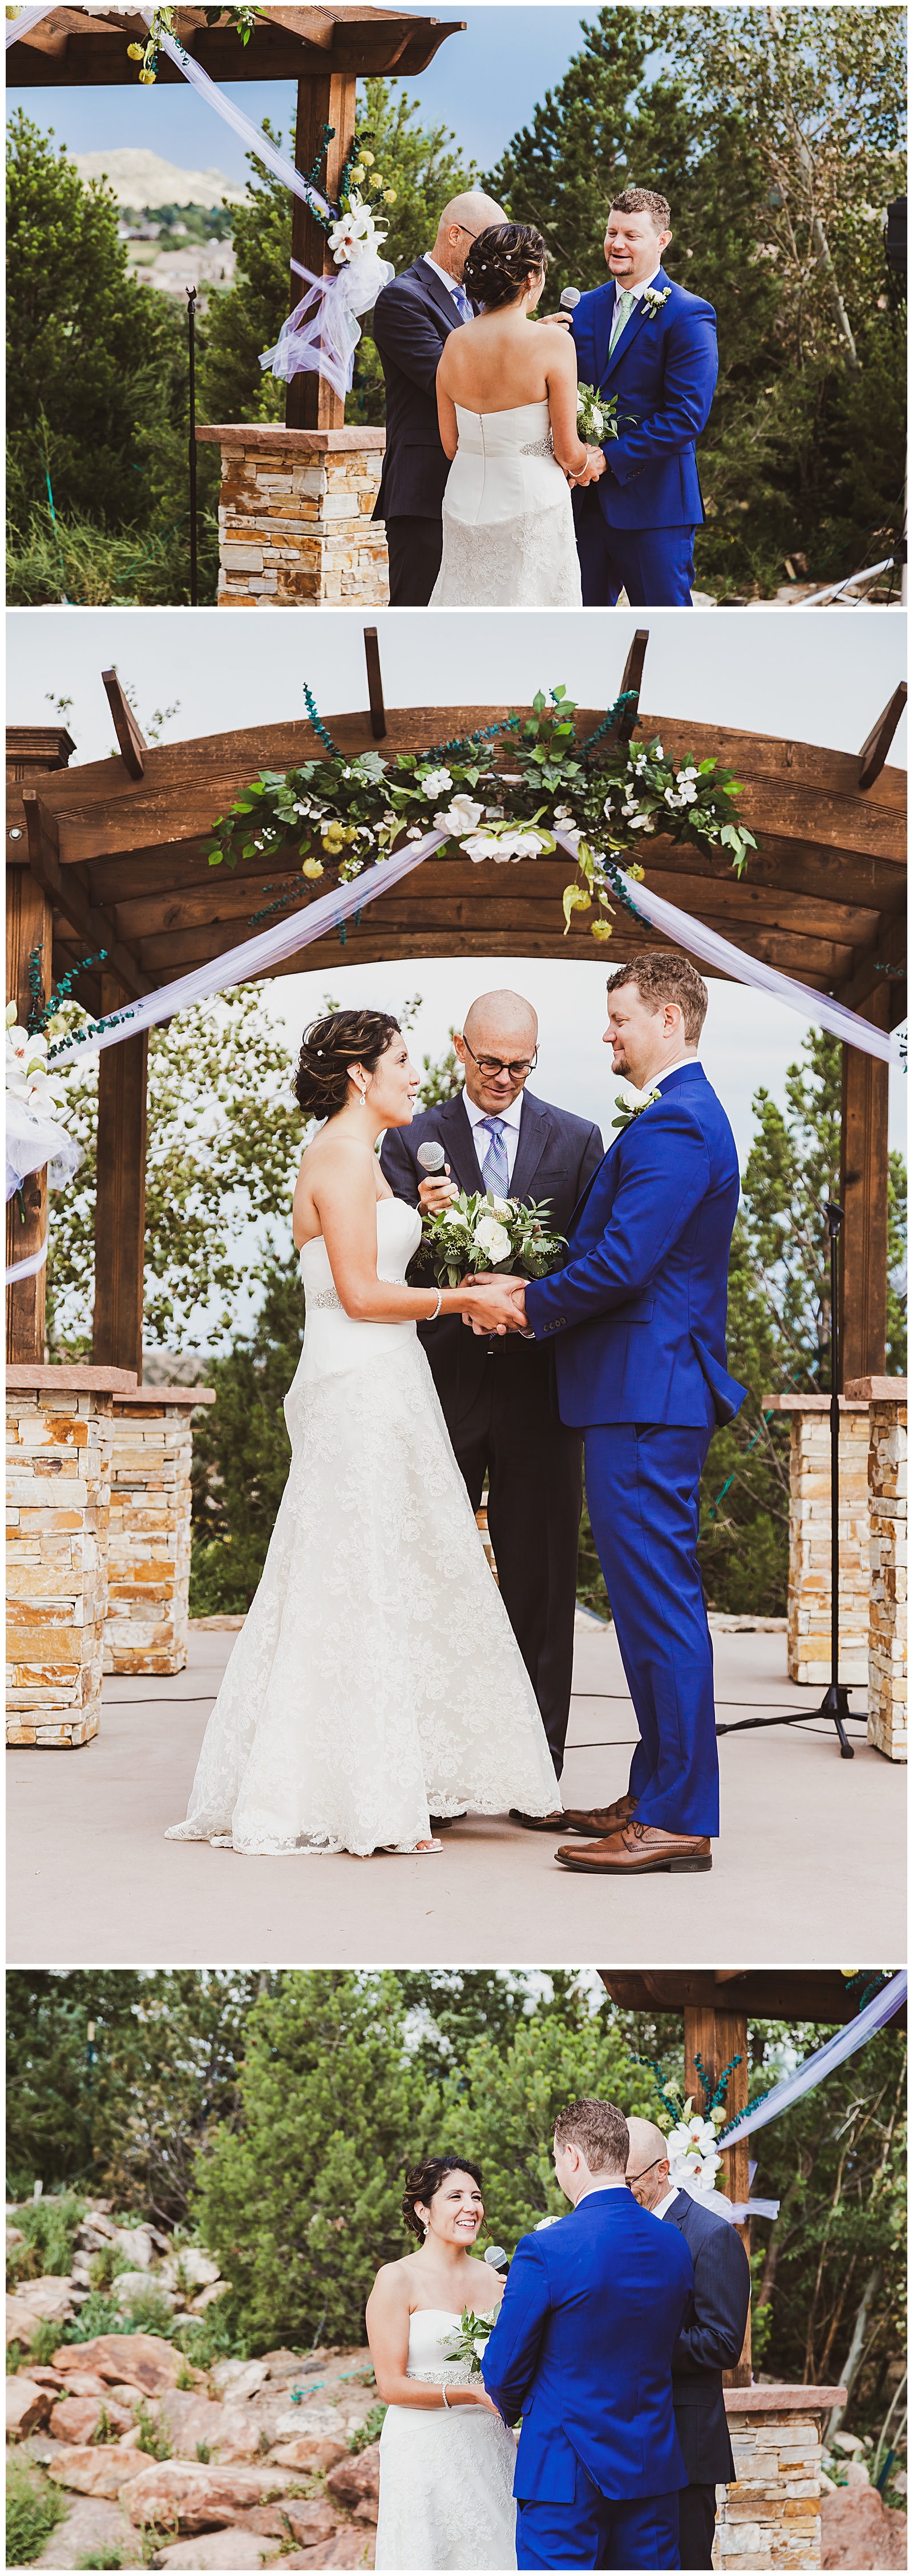 intimate wedding at willow ridge manor in morrison, co